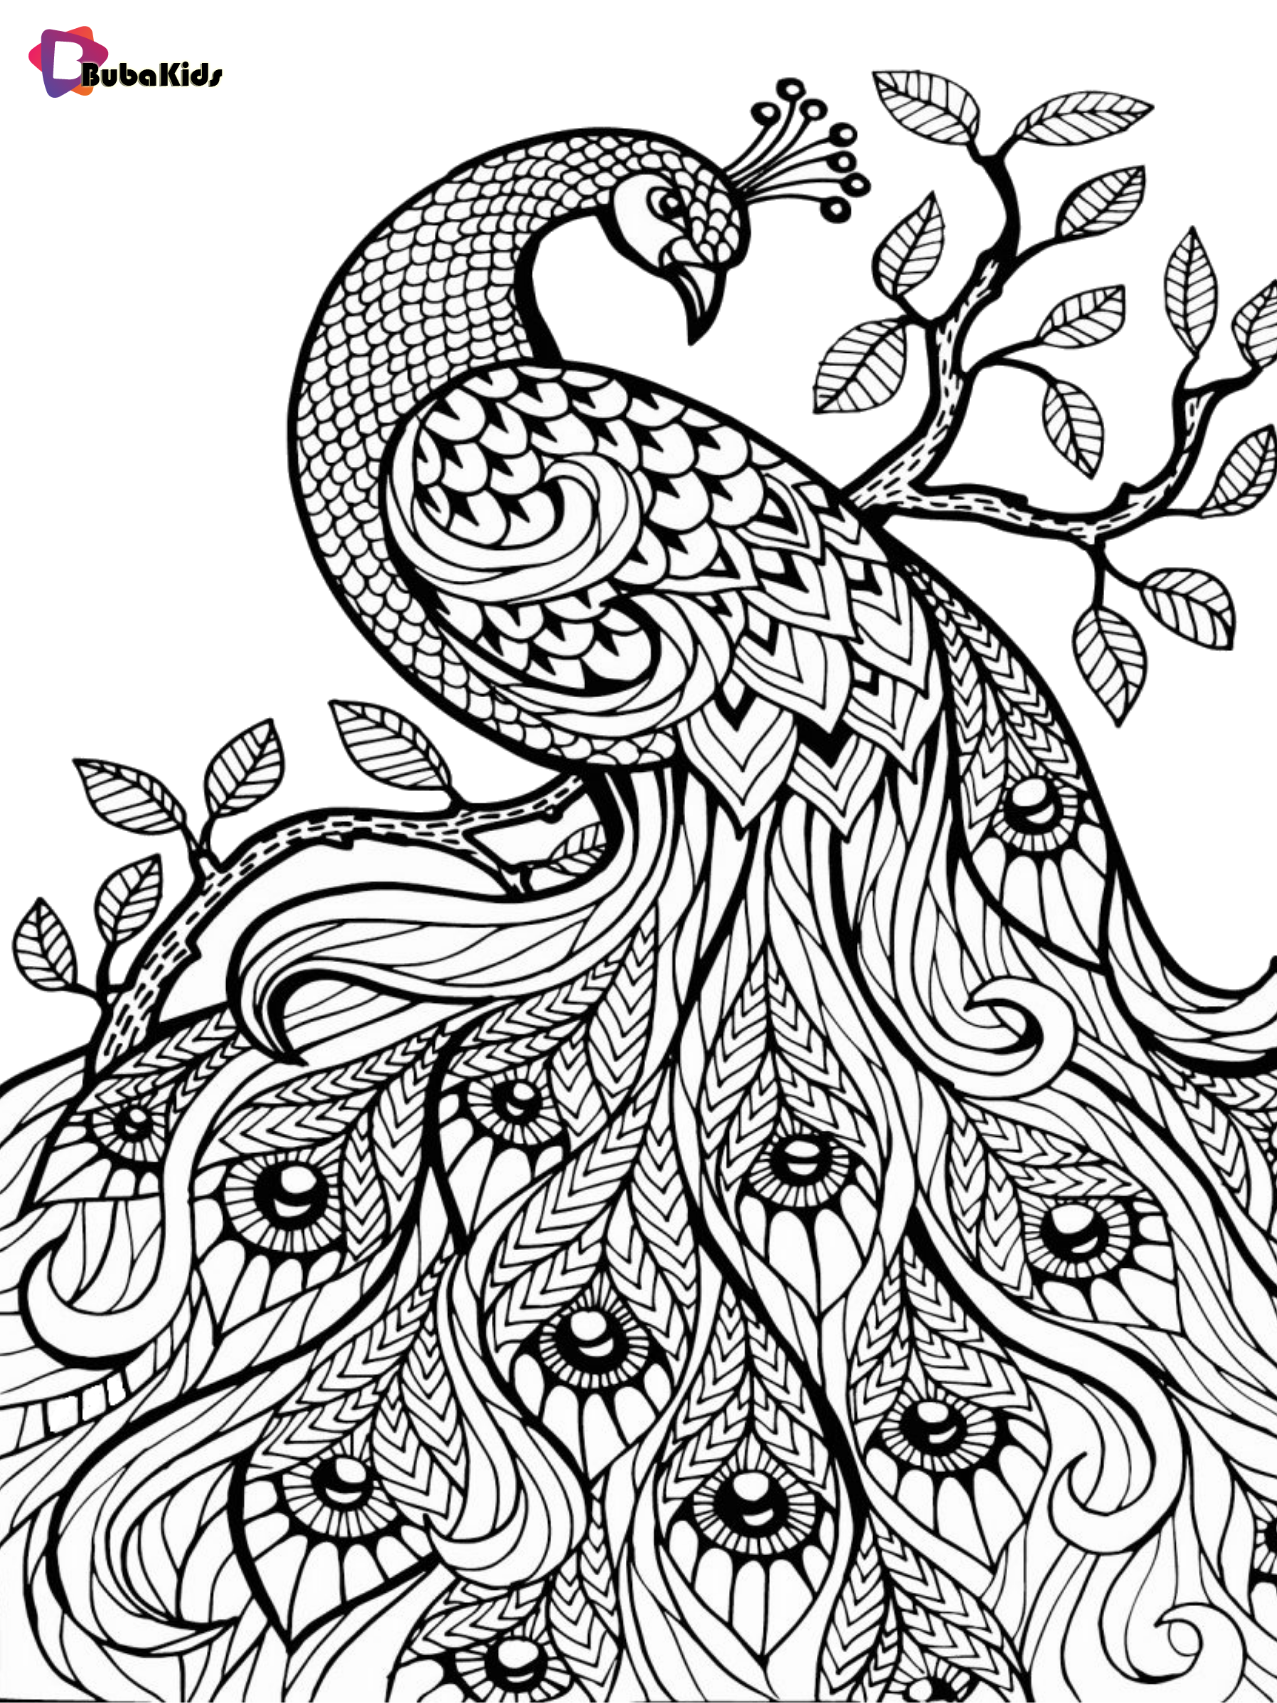 Animal bird species peacock coloring pages for adults and children Wallpaper